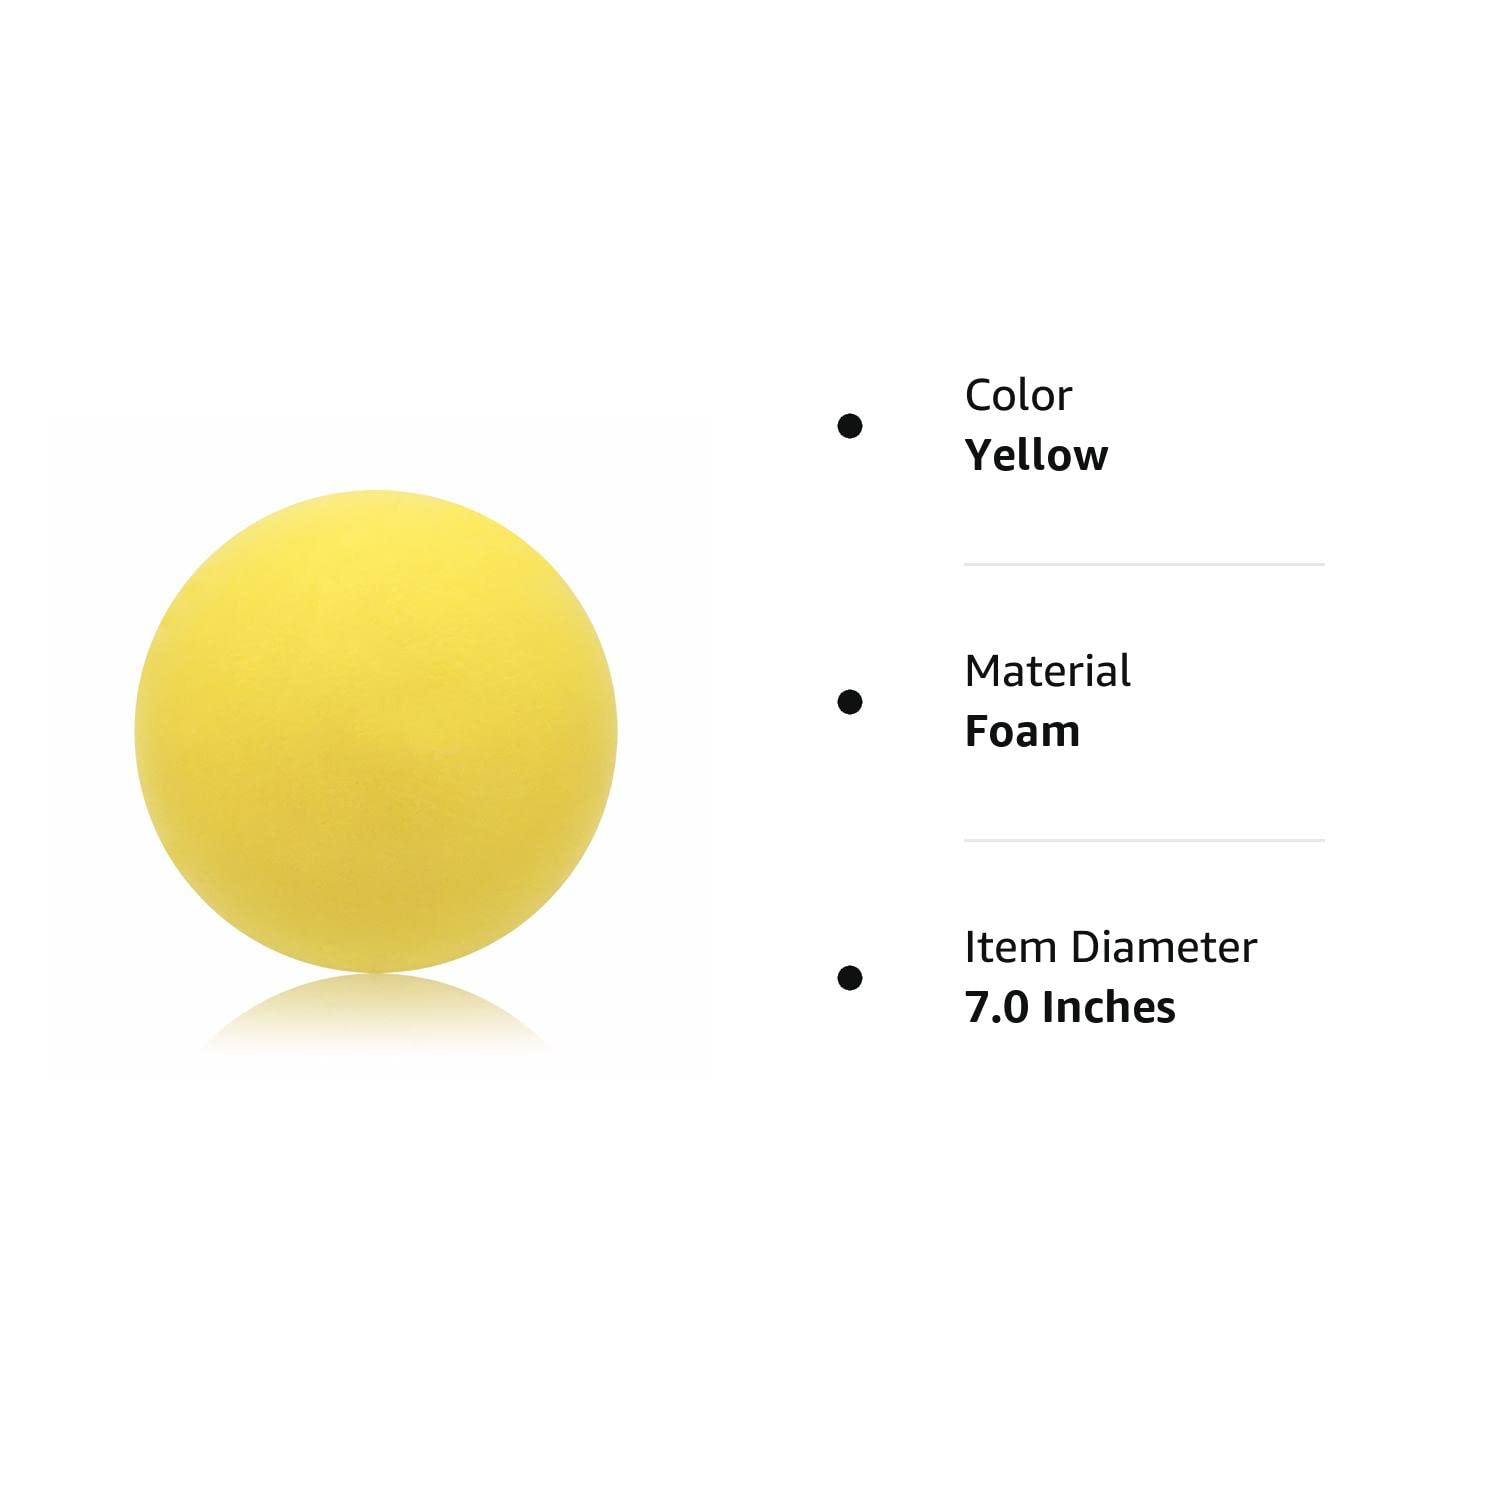 7-Inch Uncoated High Density Foam Ball - for Over 3 Years Old Kids Foam Sports Balls - Soft and Bouncy, Lightweight and Easy to Grasp Foam Silent Balls are Safe for Younger Children